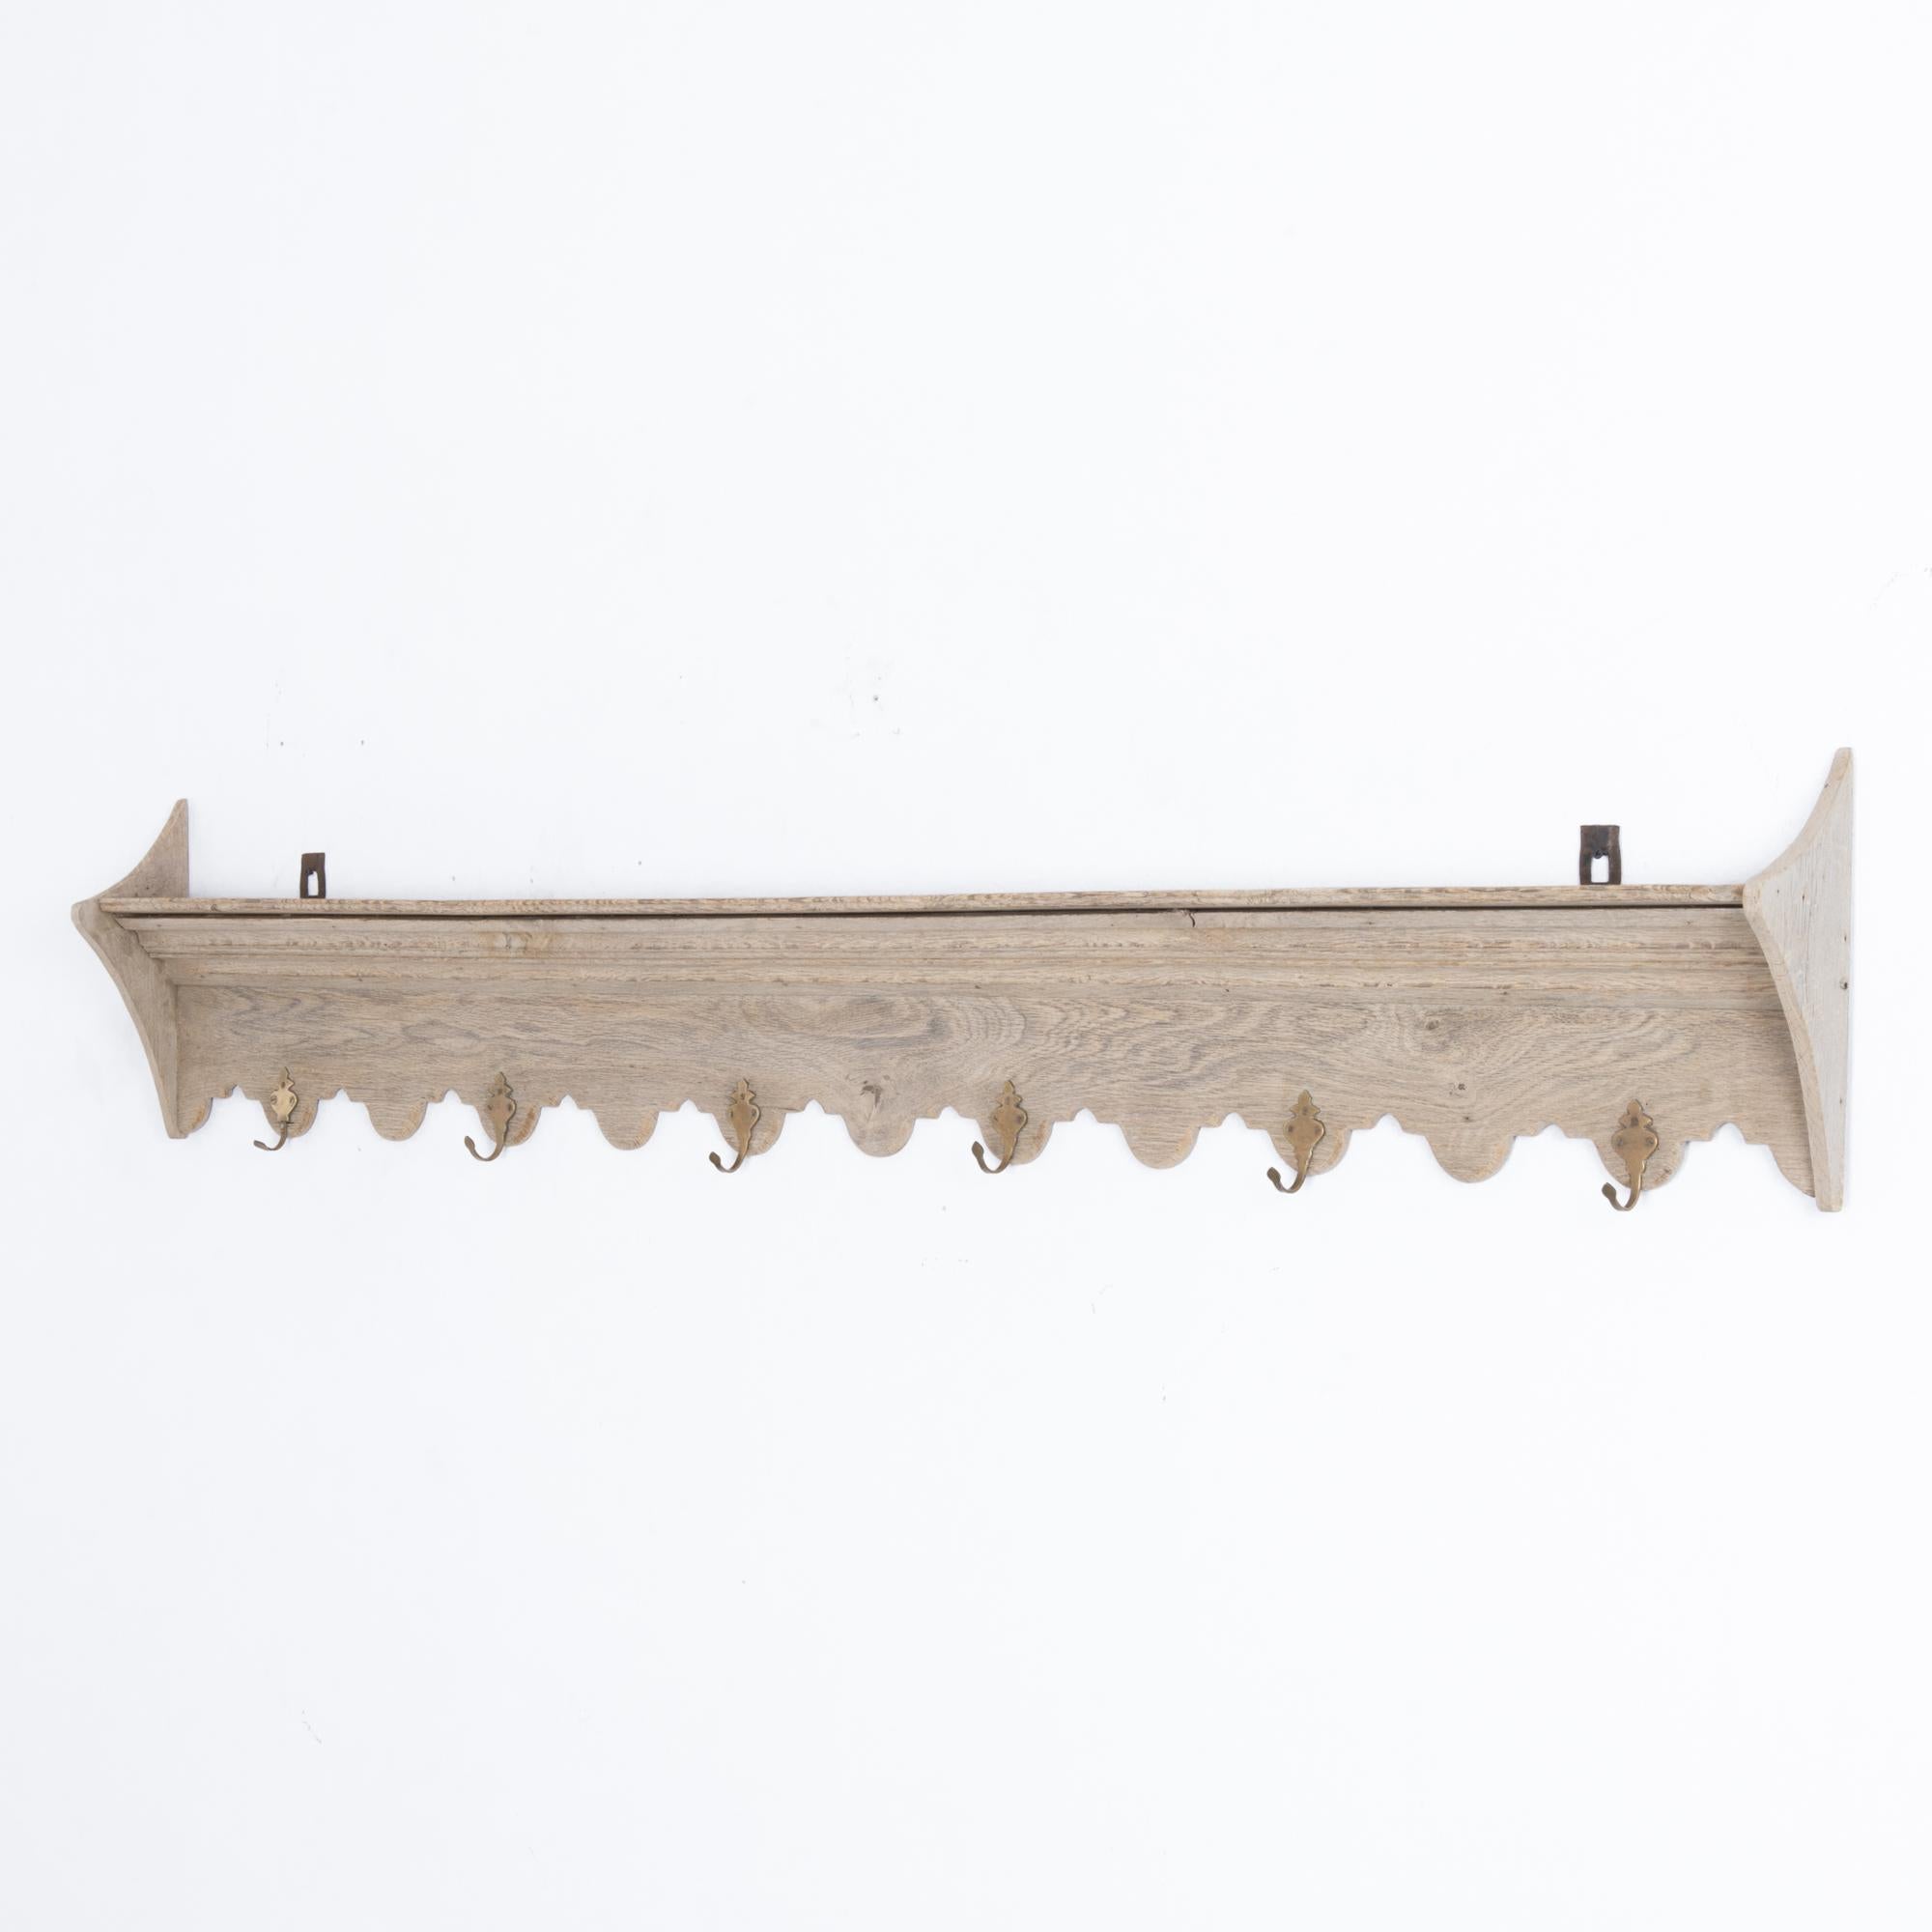 This wooden wall coat rack was made in Belgium, circa 1900. It offers a charming accent on any wall, with its crown molding, scalloped panel, and curved triangular side brackets. Hang coats, hats, or accessories on six U-hooks adorned with delicate